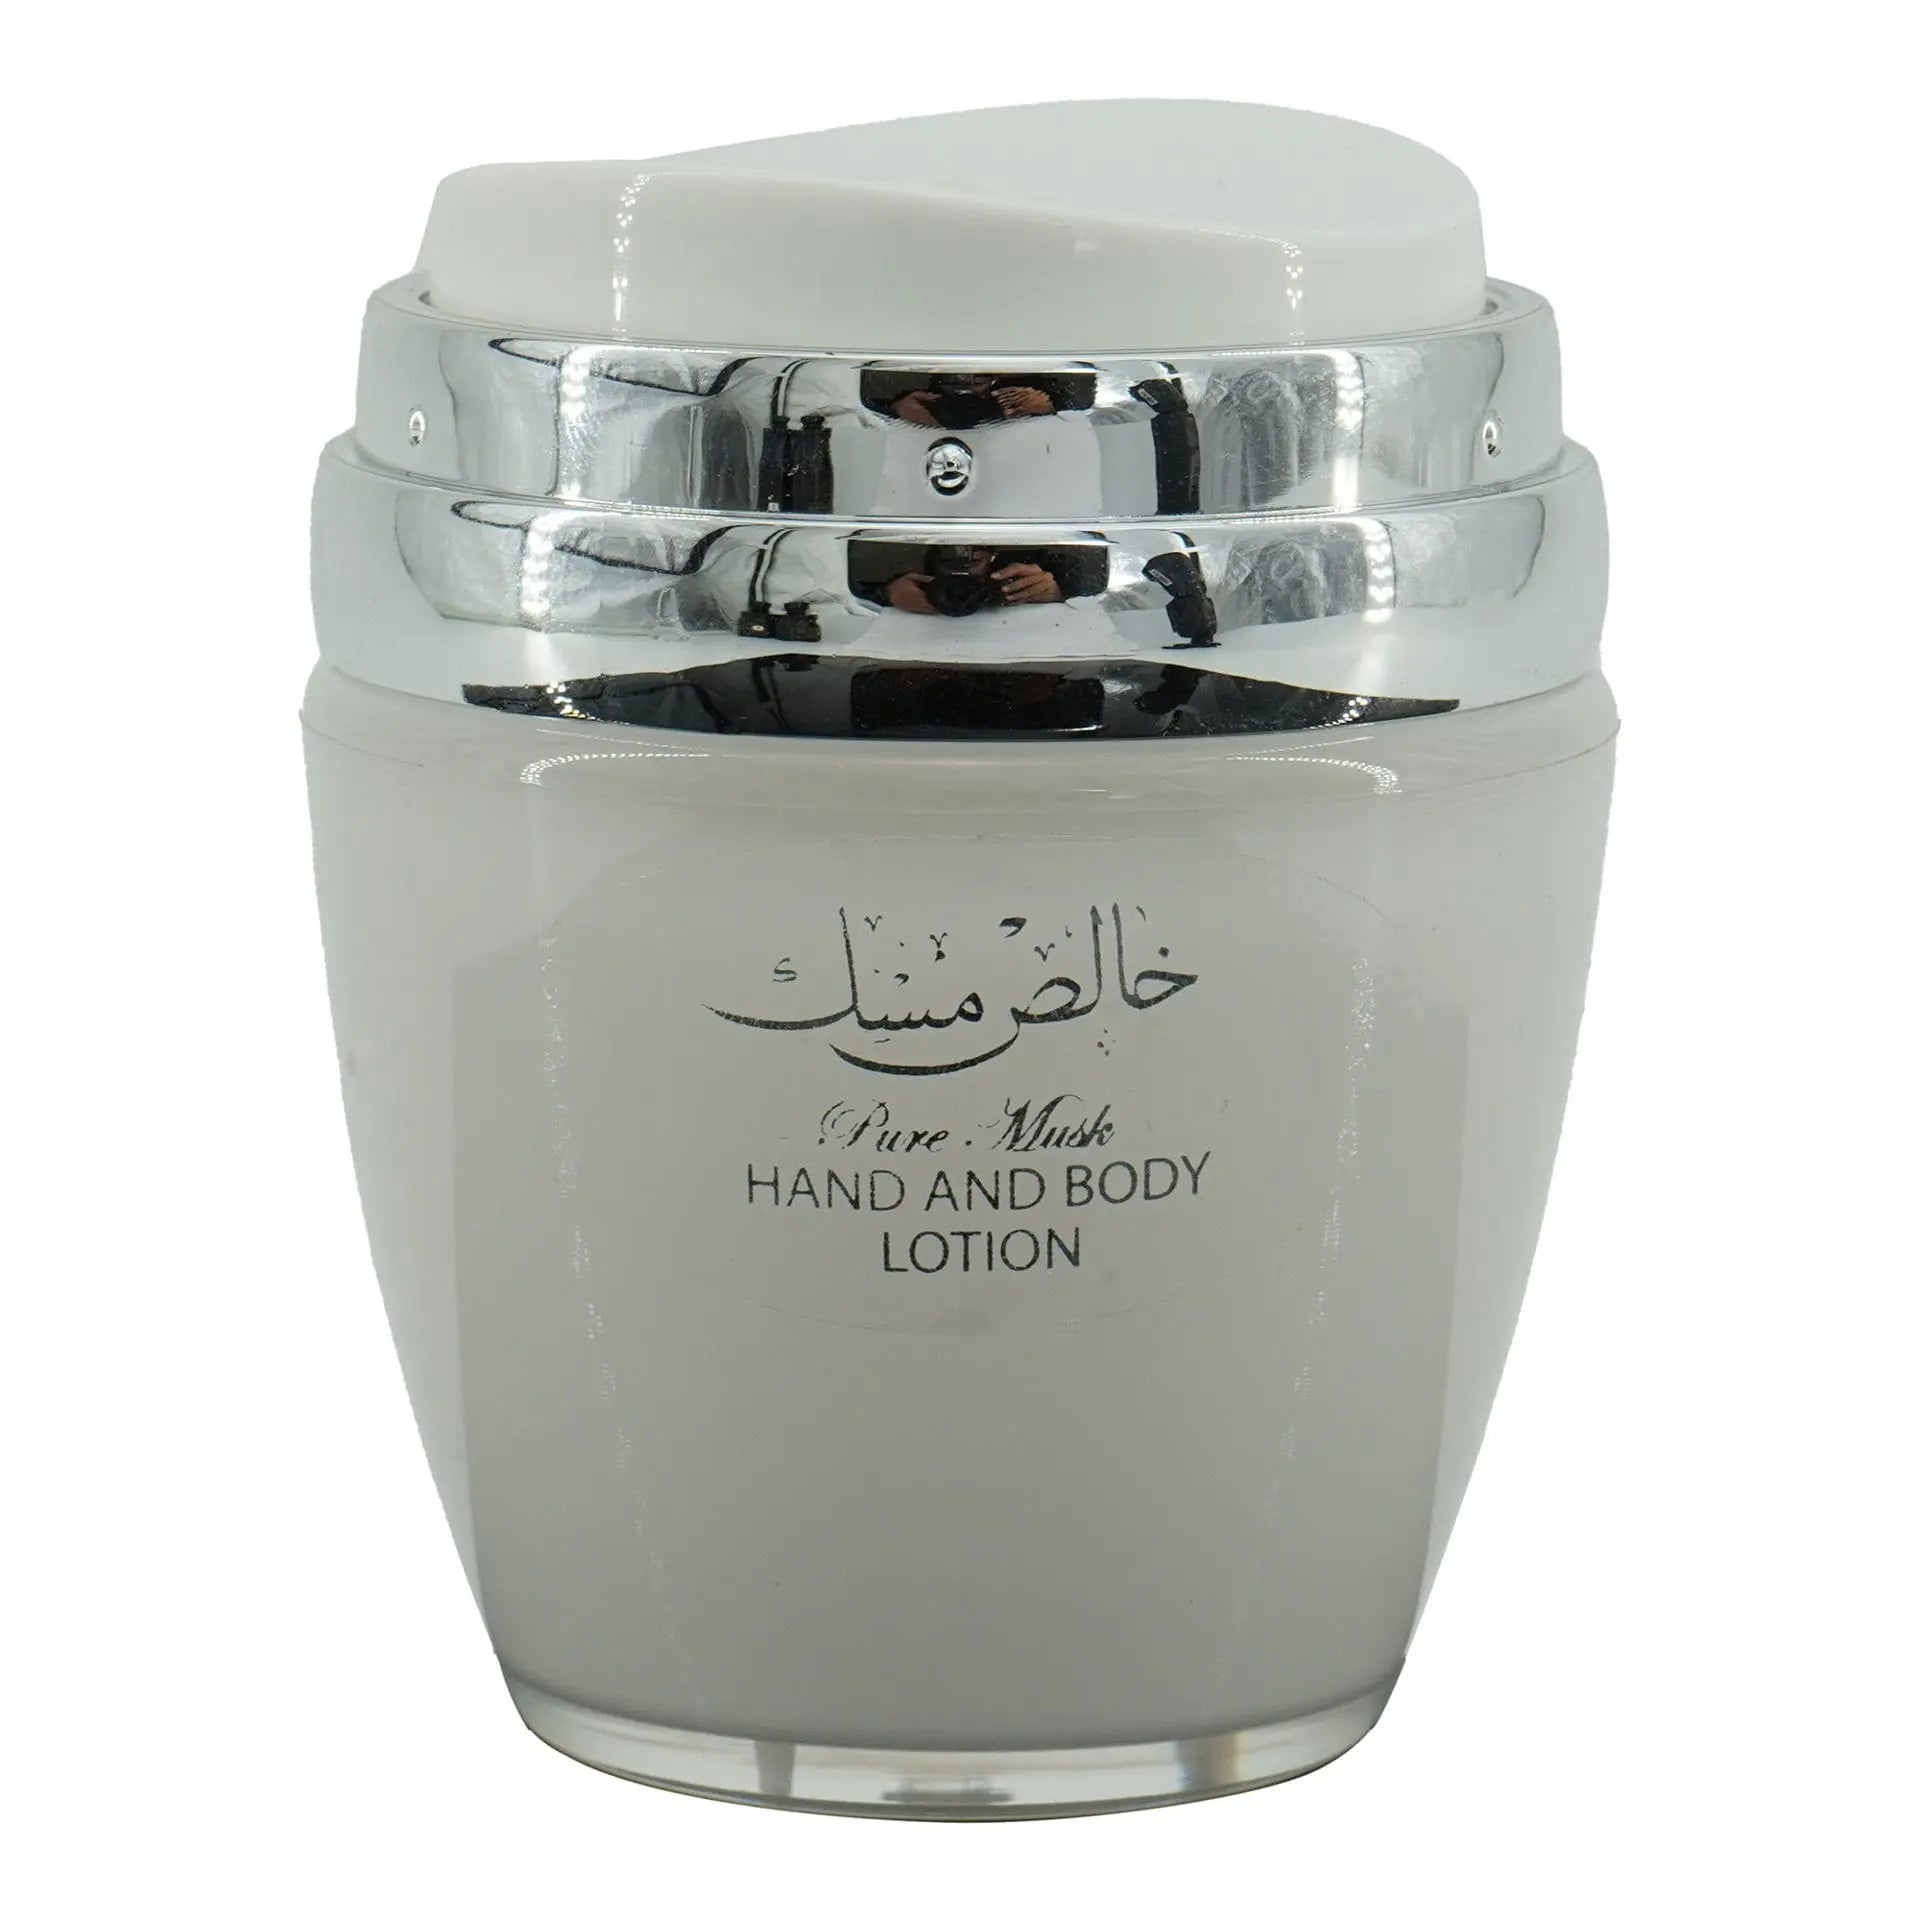 The image features a jar of "Pure Musk" hand and body lotion. The jar is a light gray color with a silver and transparent lid. On the front of the jar, there's a label with Arabic calligraphy at the top and the English words "Pure Musk HAND AND BODY LOTION" printed below. The jar's design is simple yet elegant, with the shiny silver accents of the lid adding a touch of sophistication.